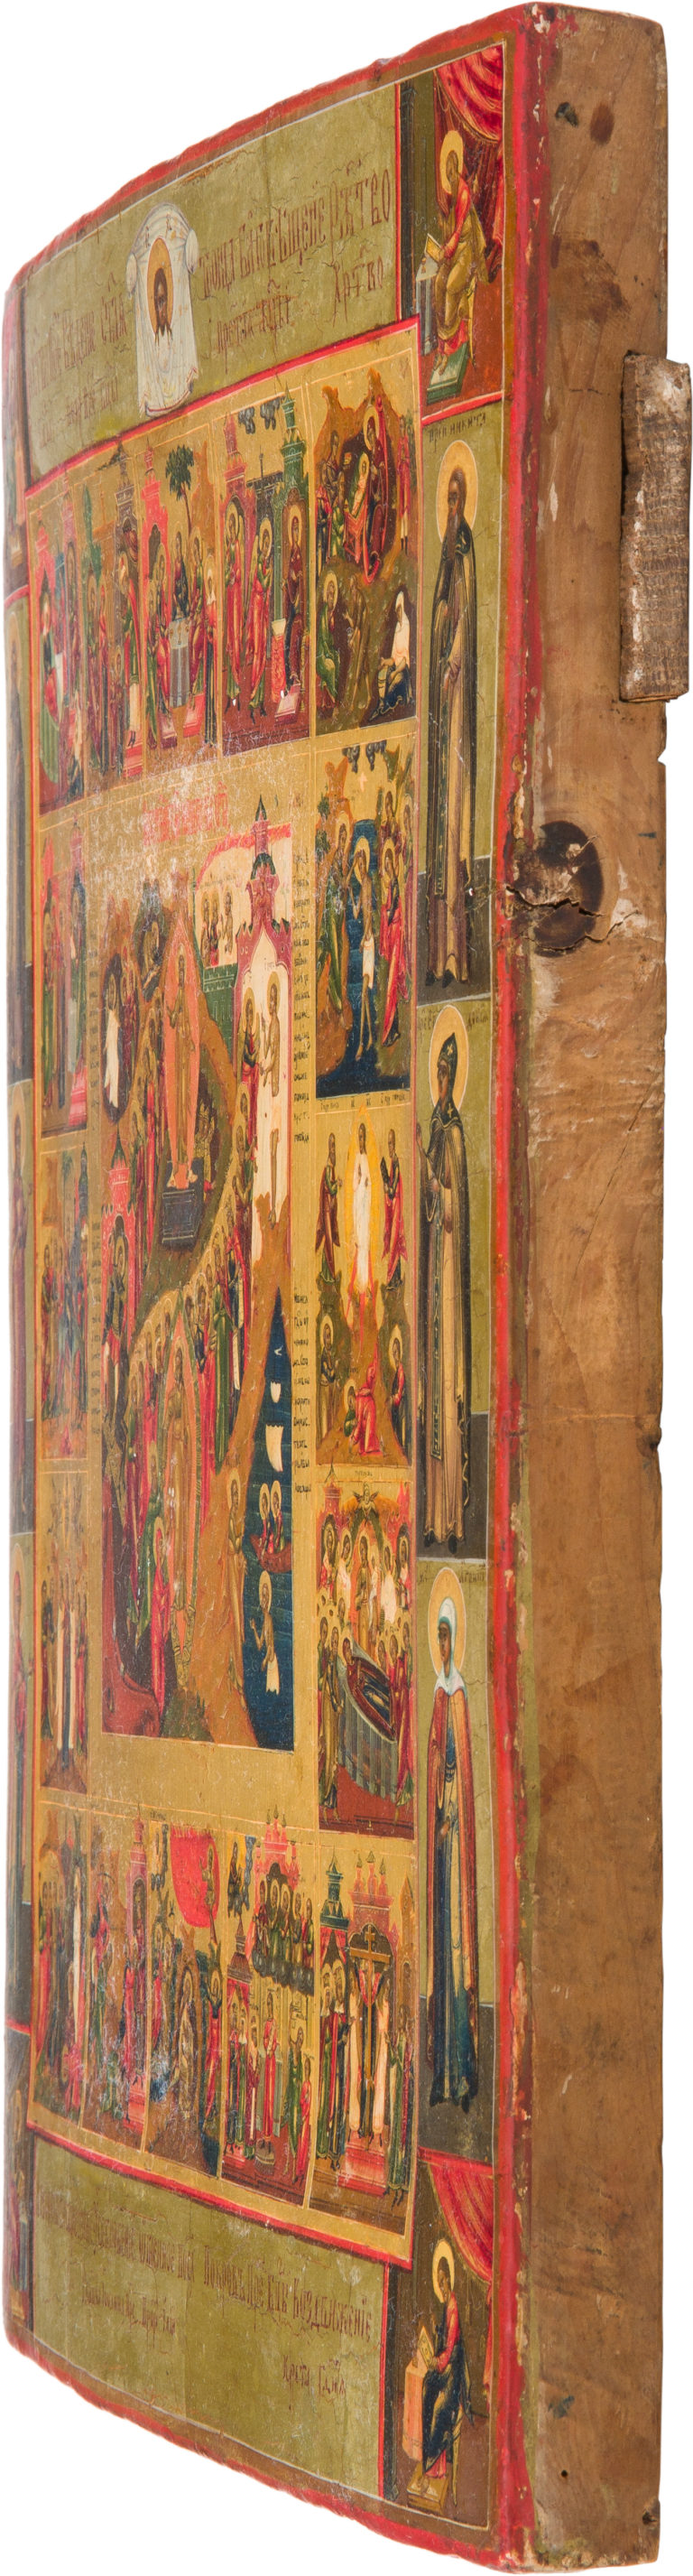 №22 The Resurrection – The Harrowing of Hades, with the Church Feasts, the Holy Mandylion, and selected saints in 16 border scenes